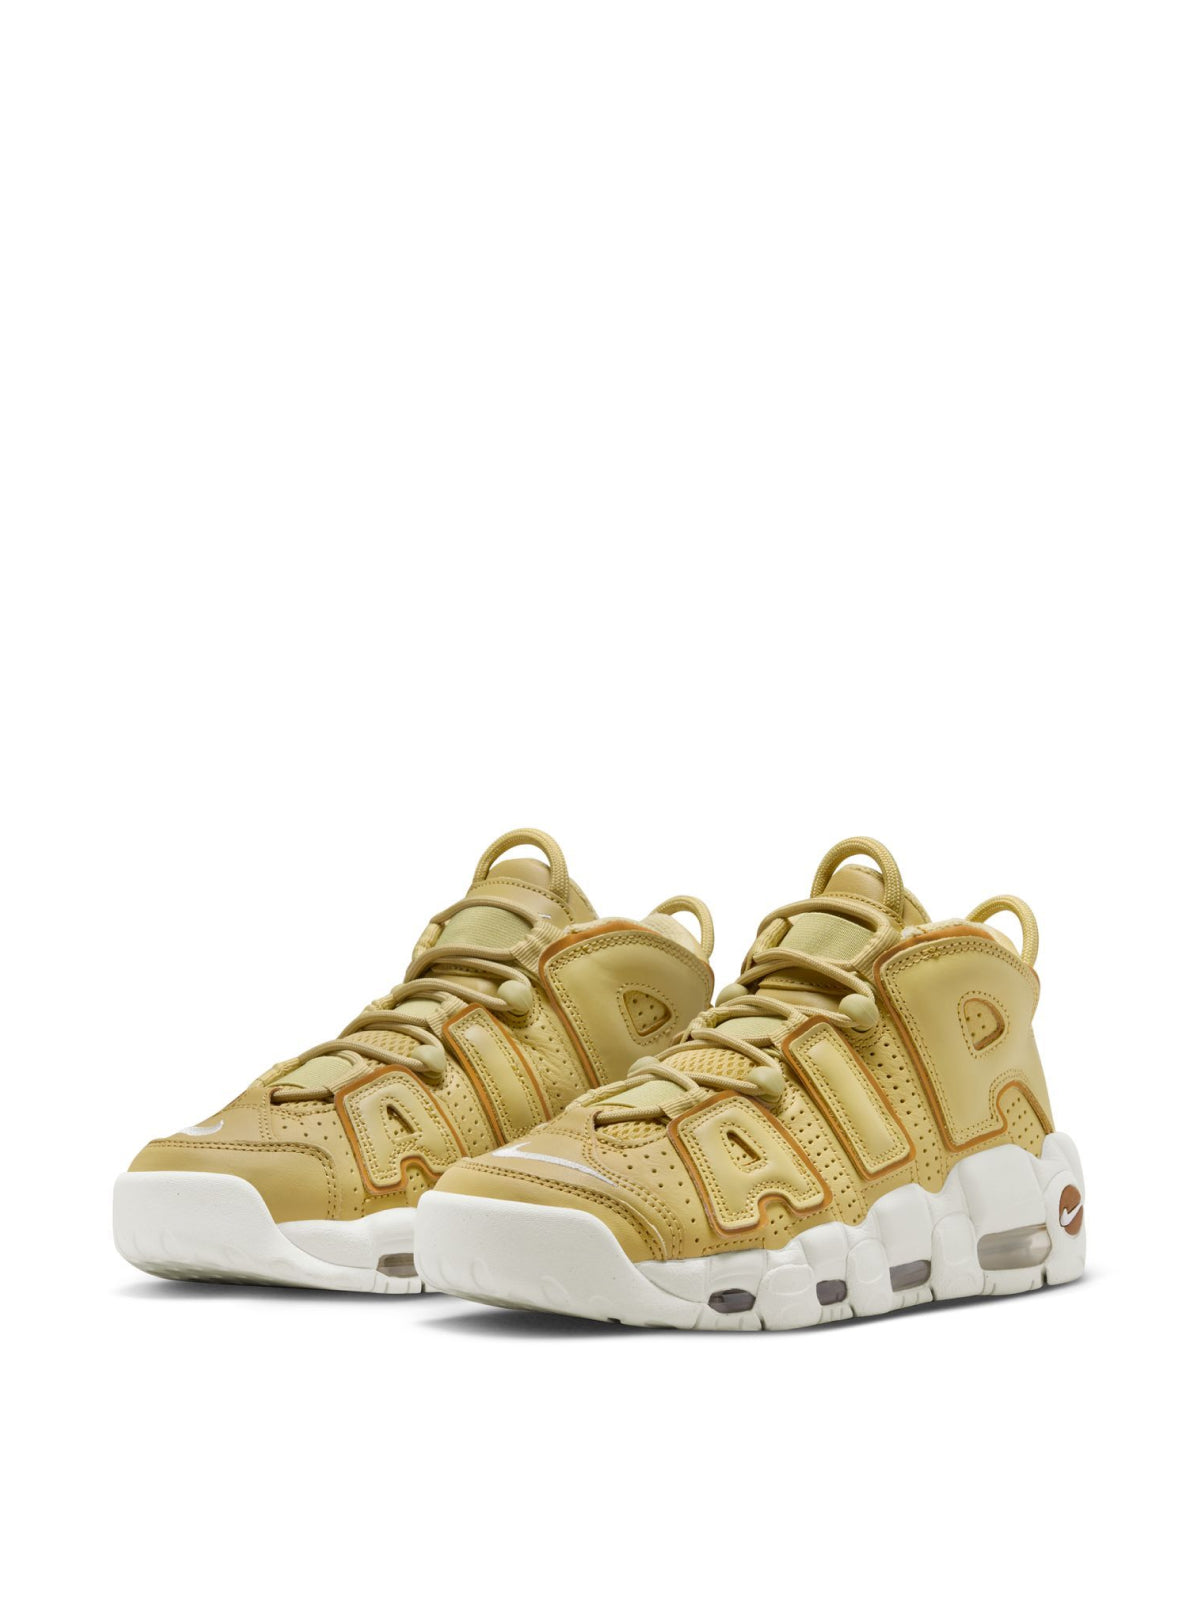 Nike-OUTLET-SALE-Air More Uptempo Sneakers-ARCHIVIST